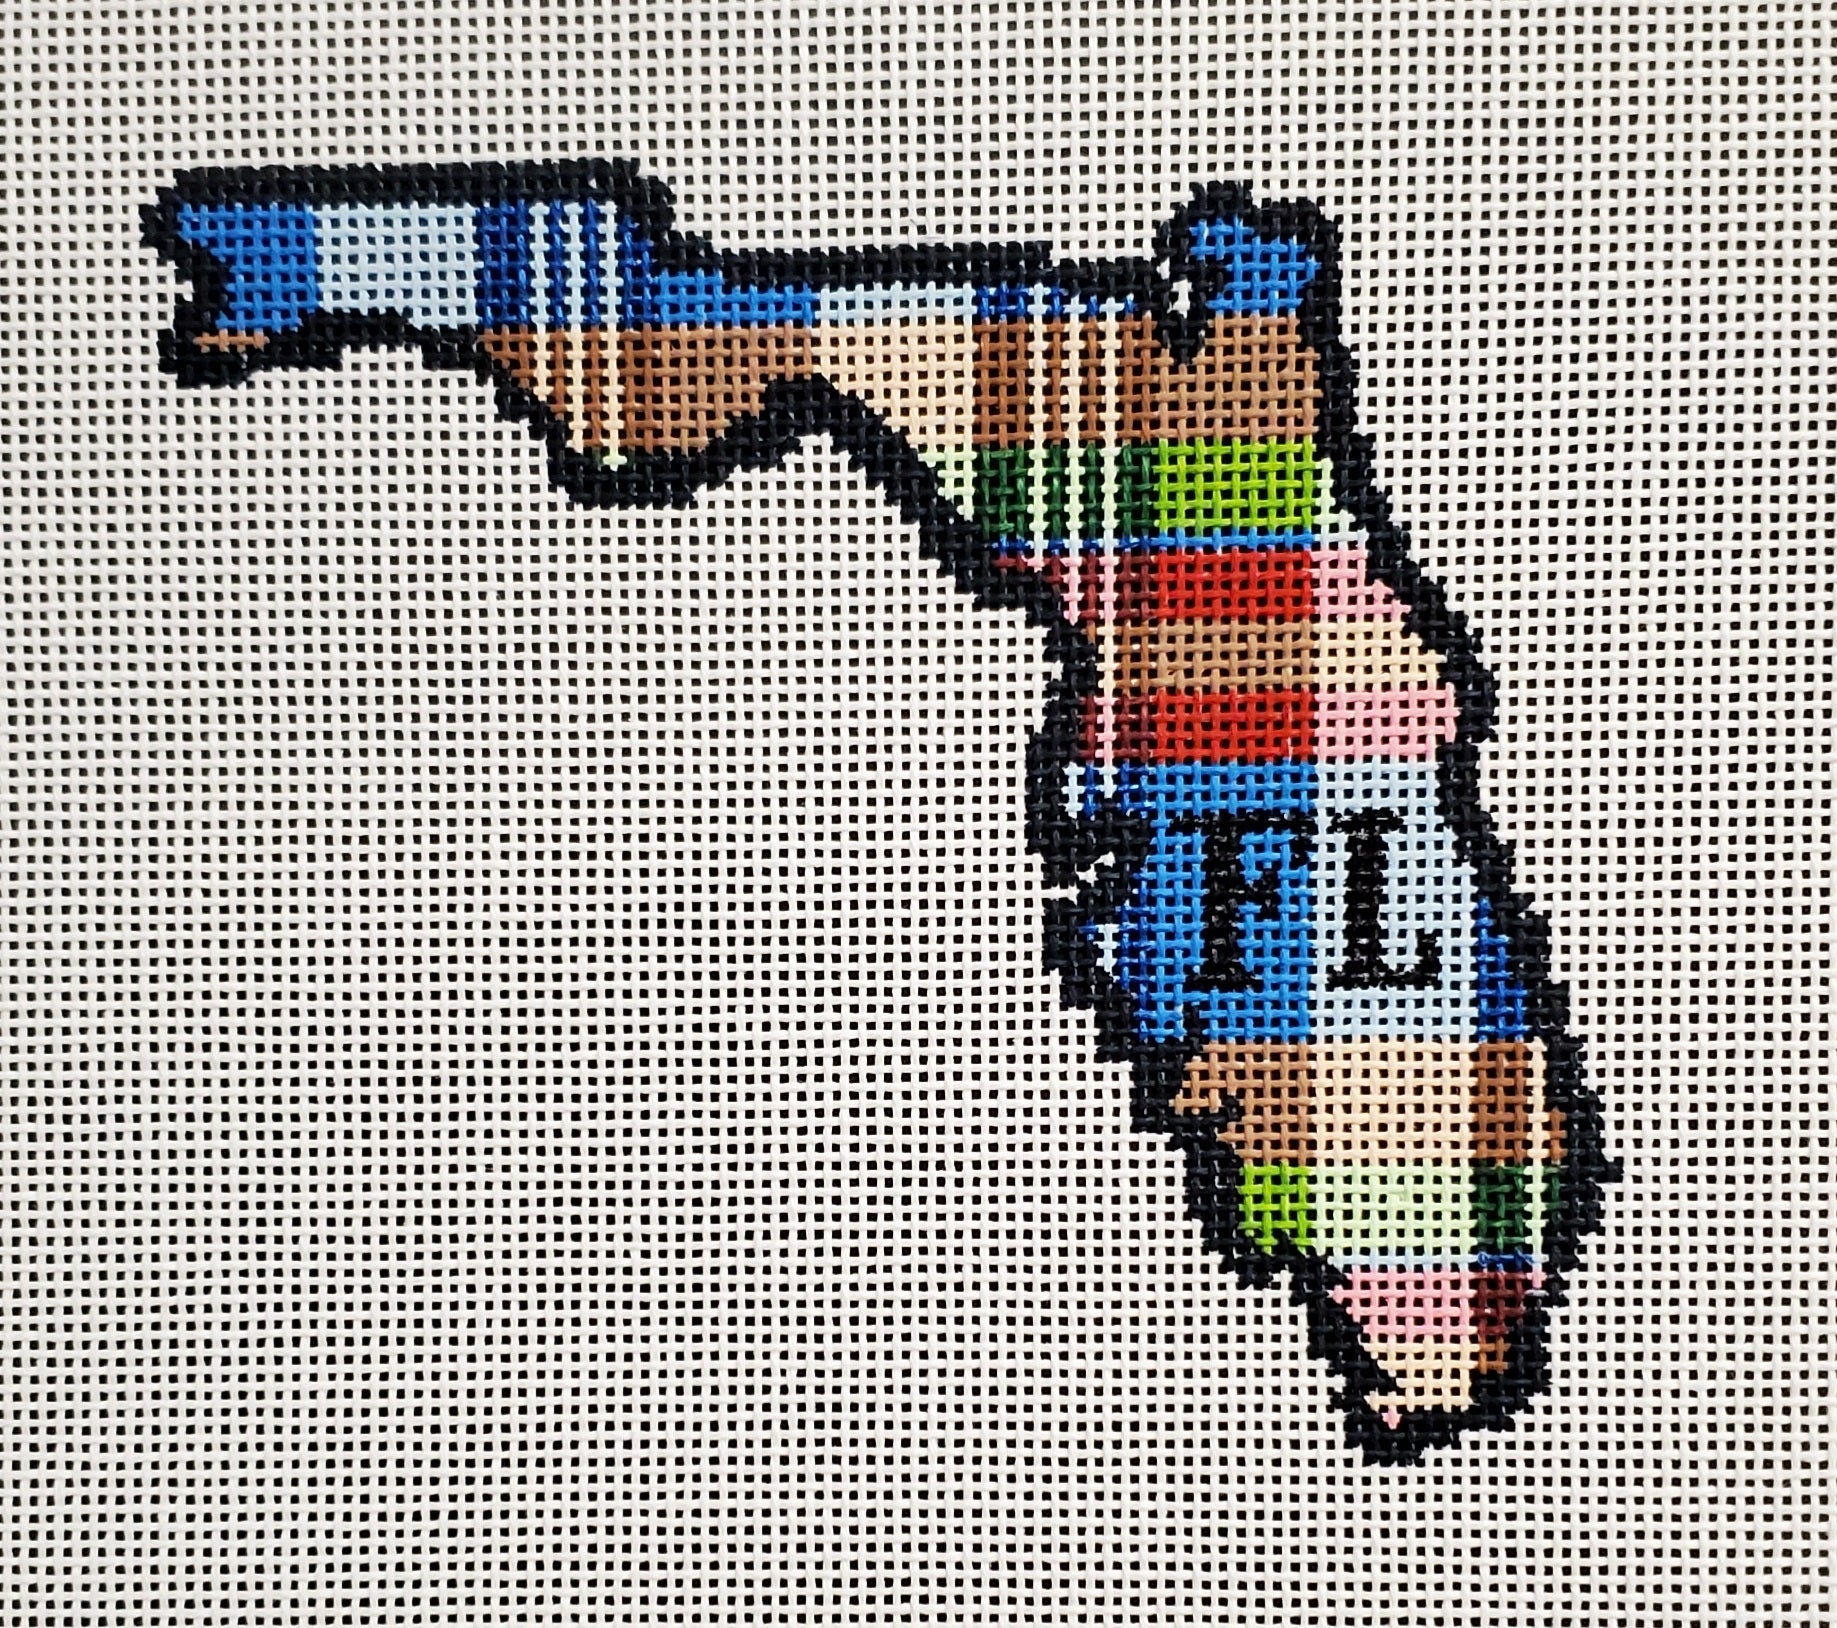 Plaid State of Florida - The Flying Needles